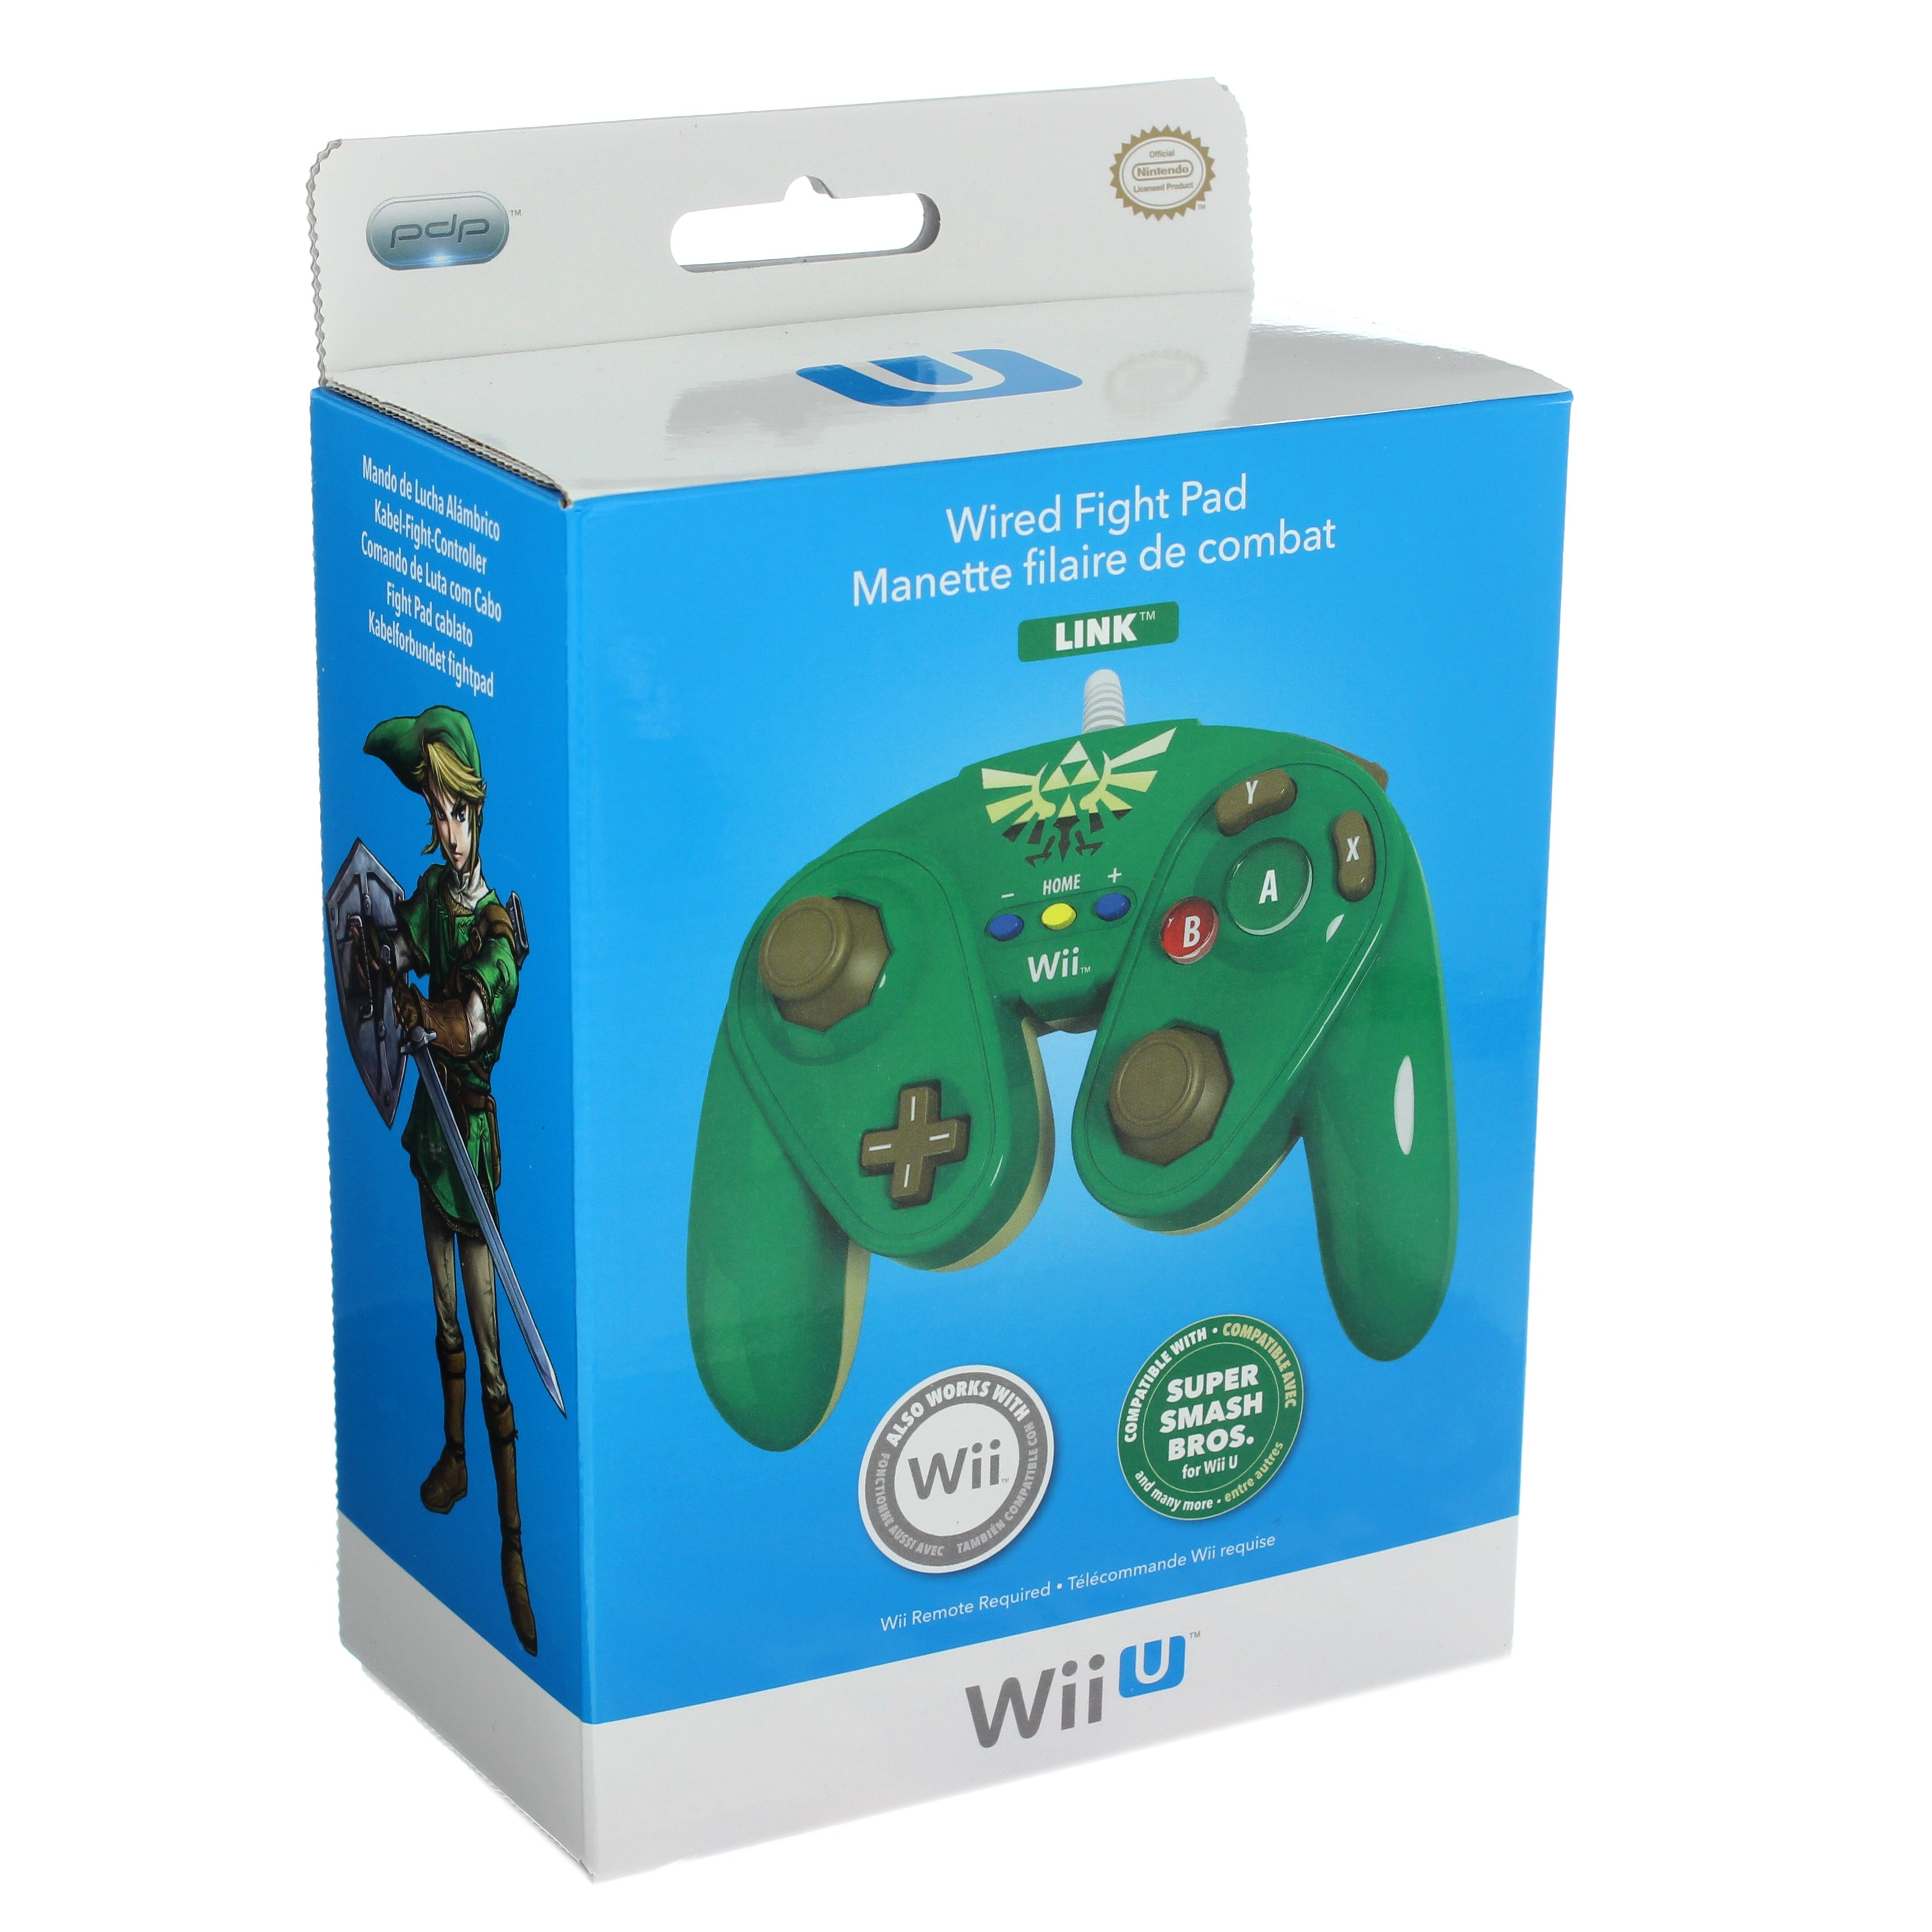 Nintendo Wii U Wired Fight Pad Link Controller Shop Nintendo Wii U Wired Fight Pad Link Controller Shop Nintendo Wii U Wired Fight Pad Link Controller Shop Nintendo Wii